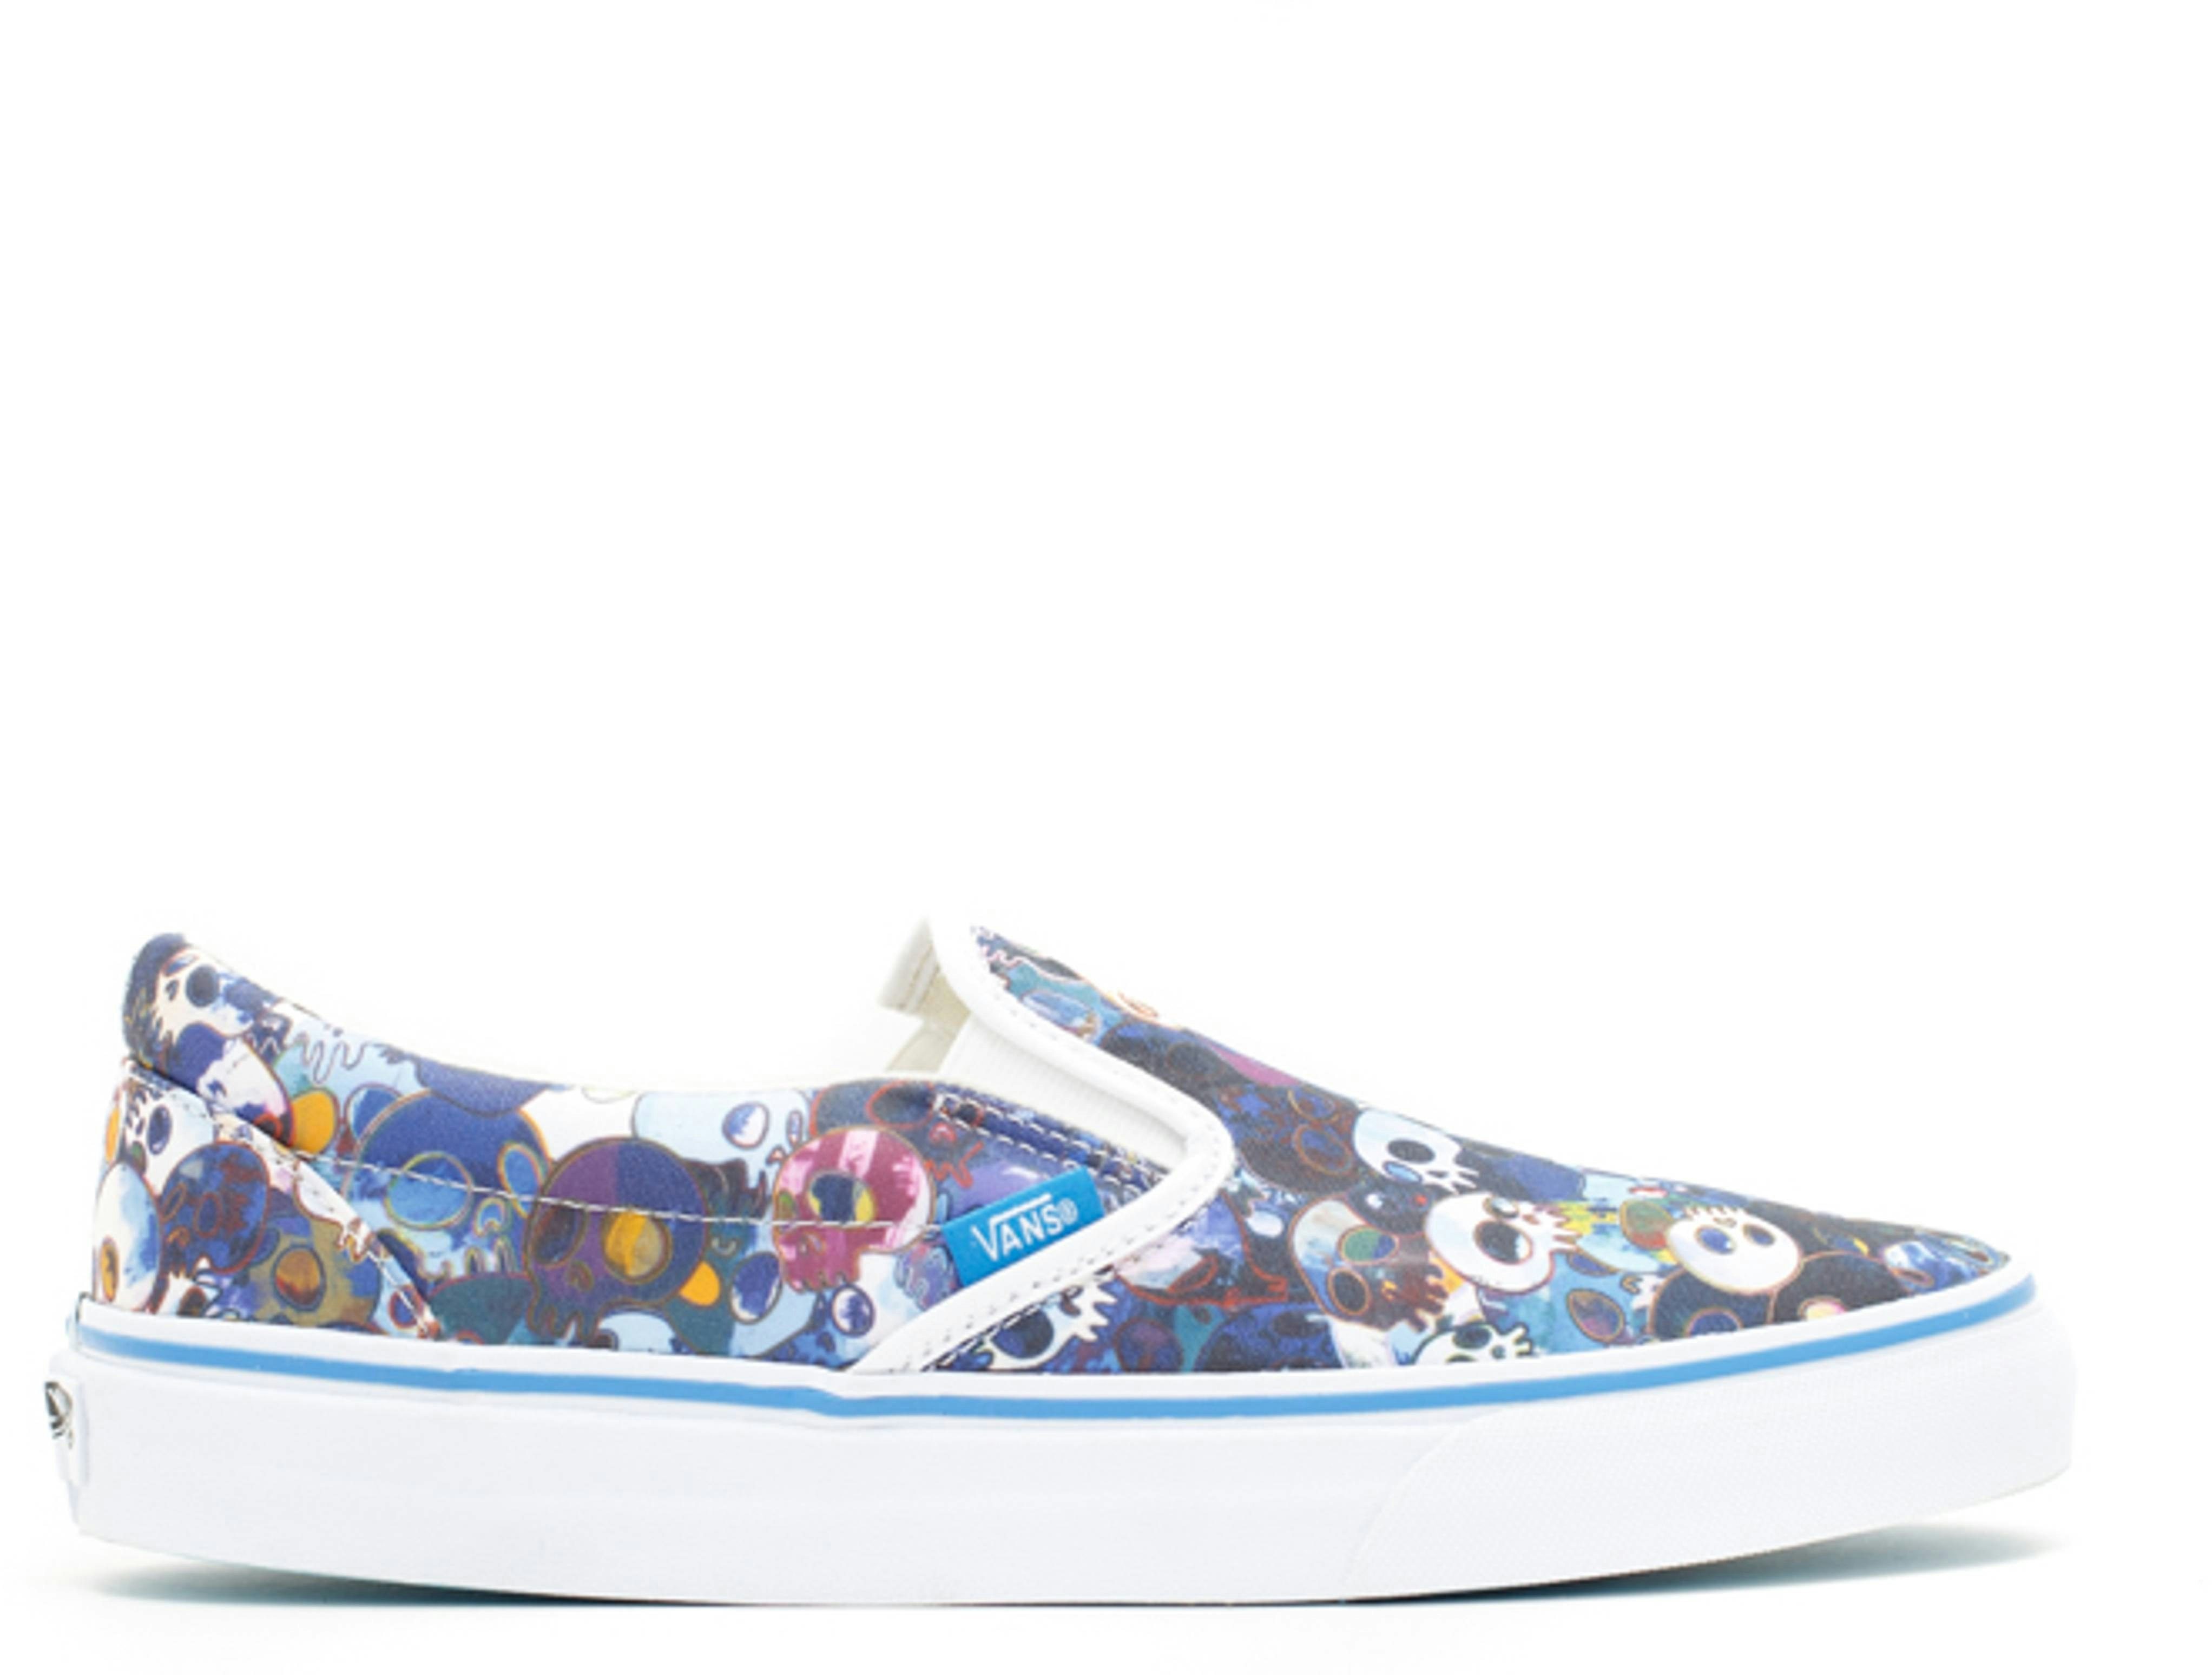 Takashi Murakami's Signature Artwork To Appear On Classic Vans Shoes 